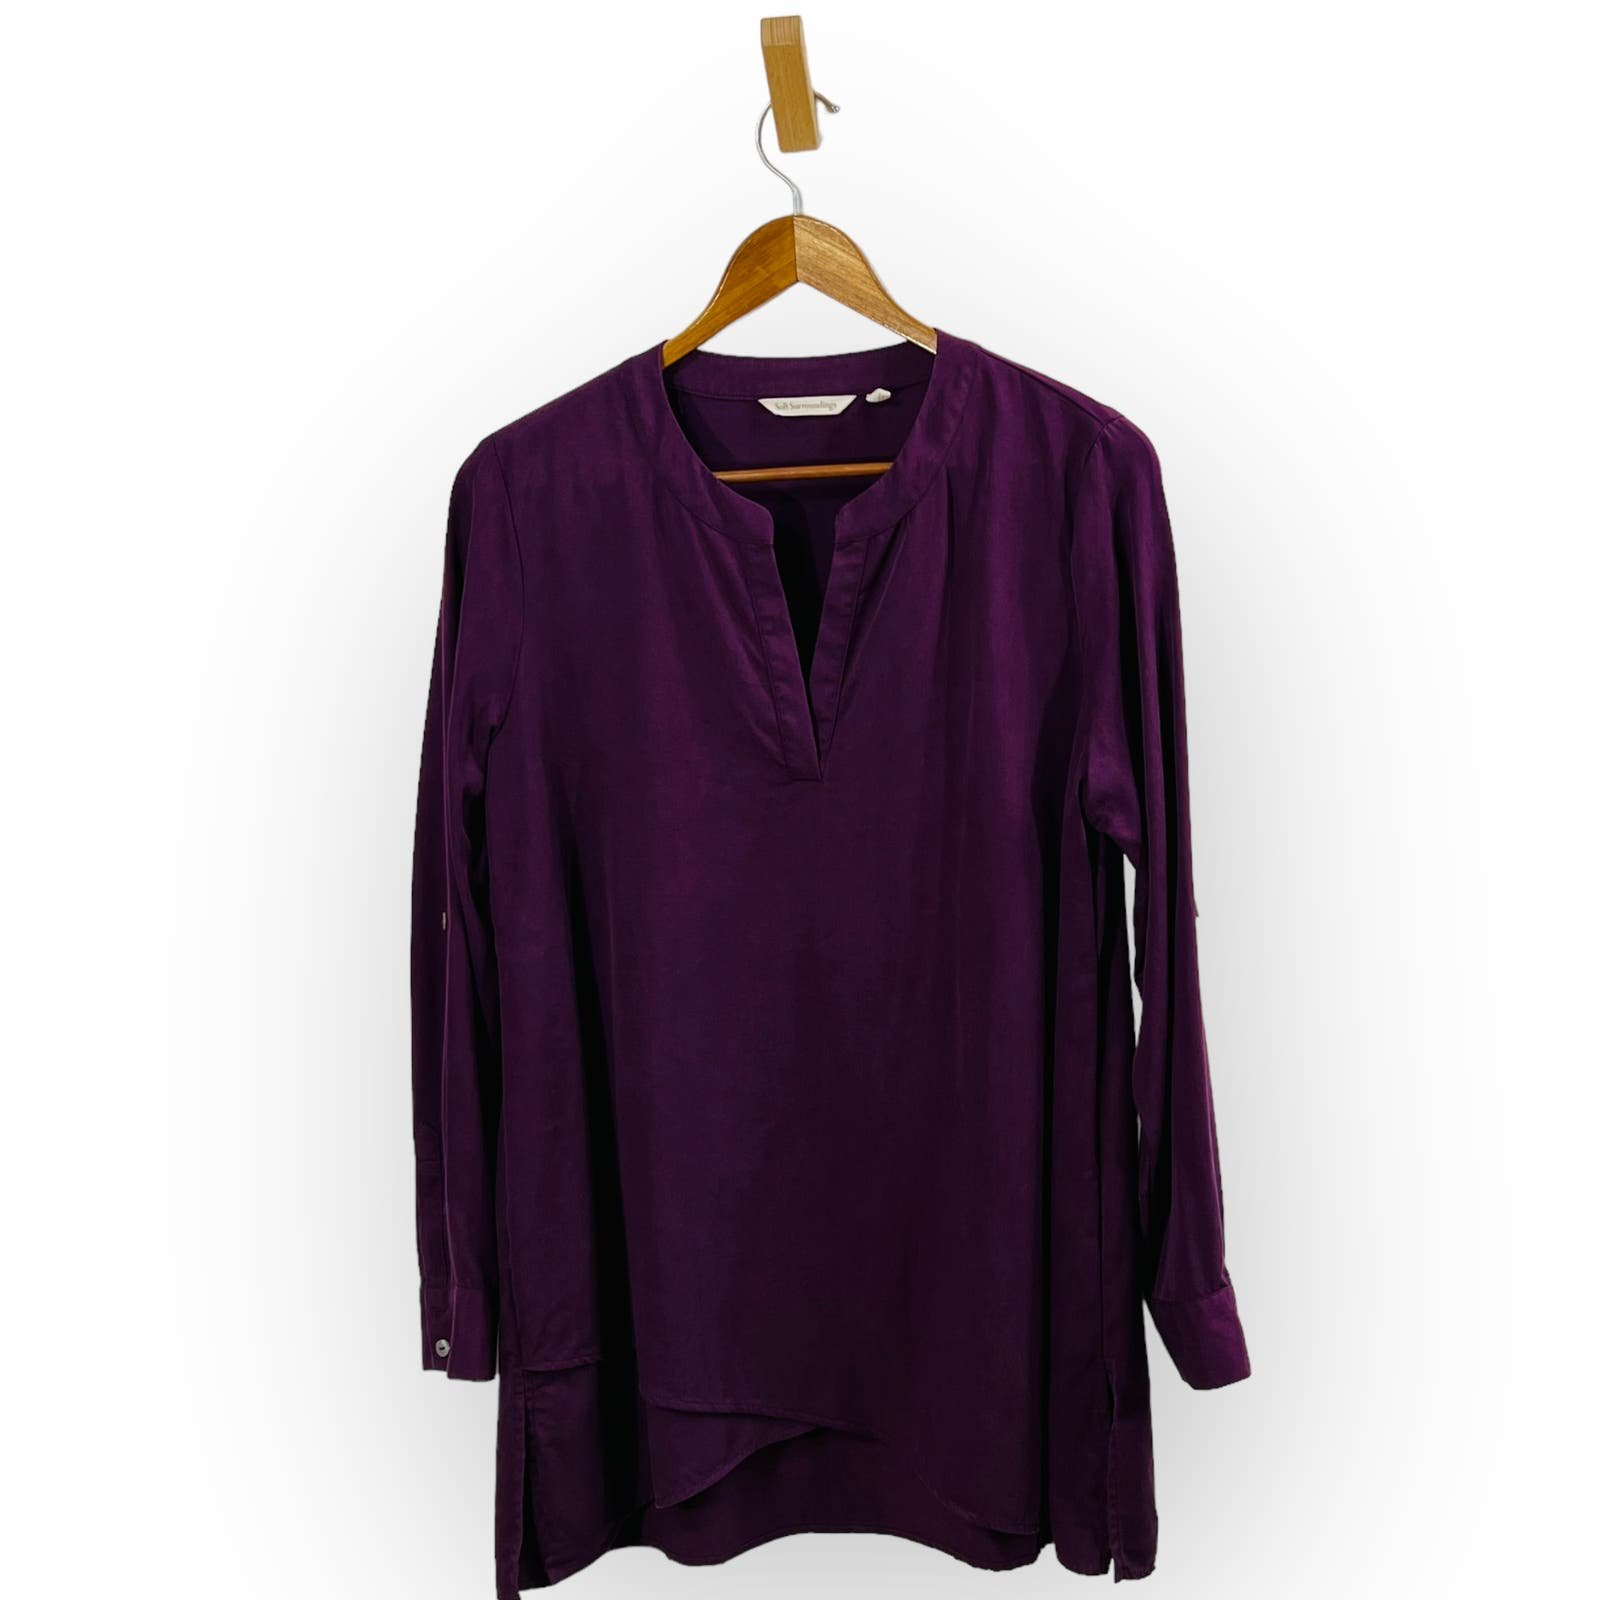 where to buy  Soft Surroundings Tunic Top Size Medium Purple Woven Tencel Roll Tab V-Neck LsQUBFHGZ US Outlet